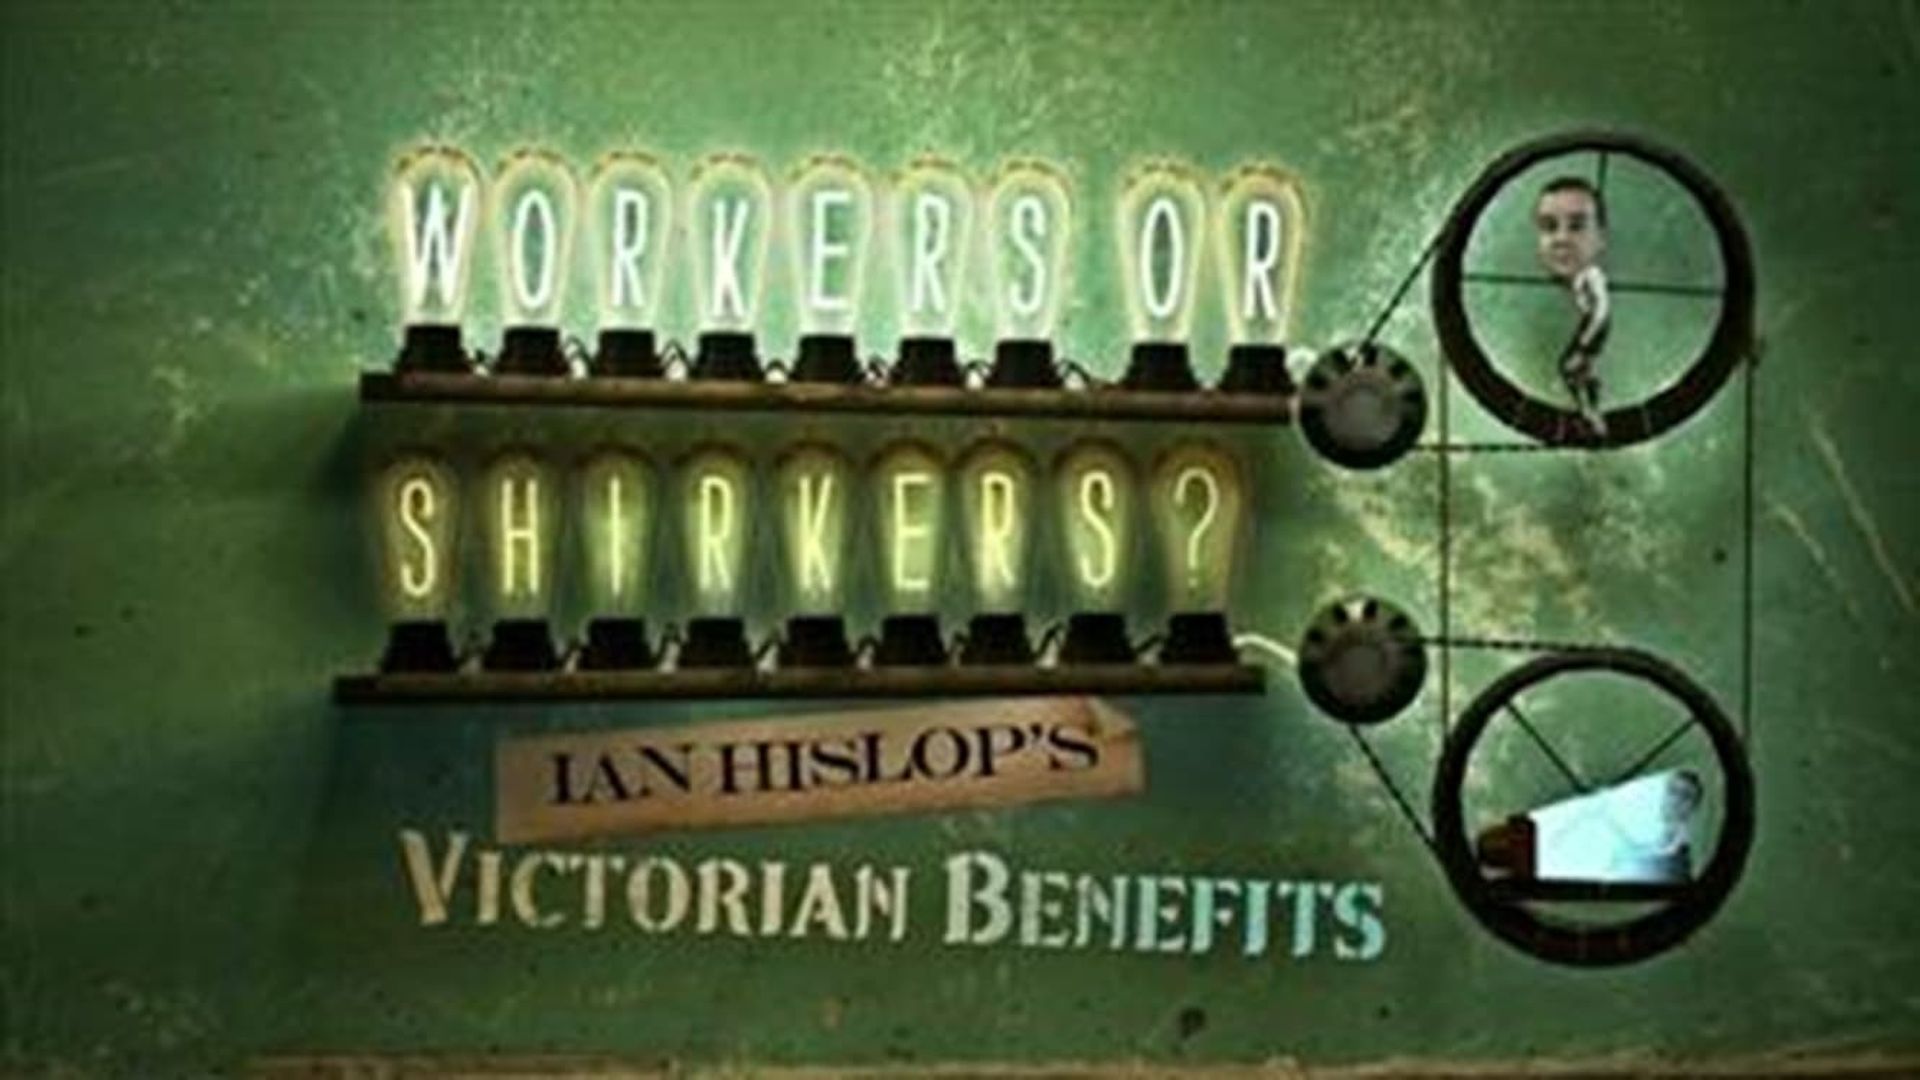 Workers or Shirkers? Ian Hislop's Victorian Benefits background